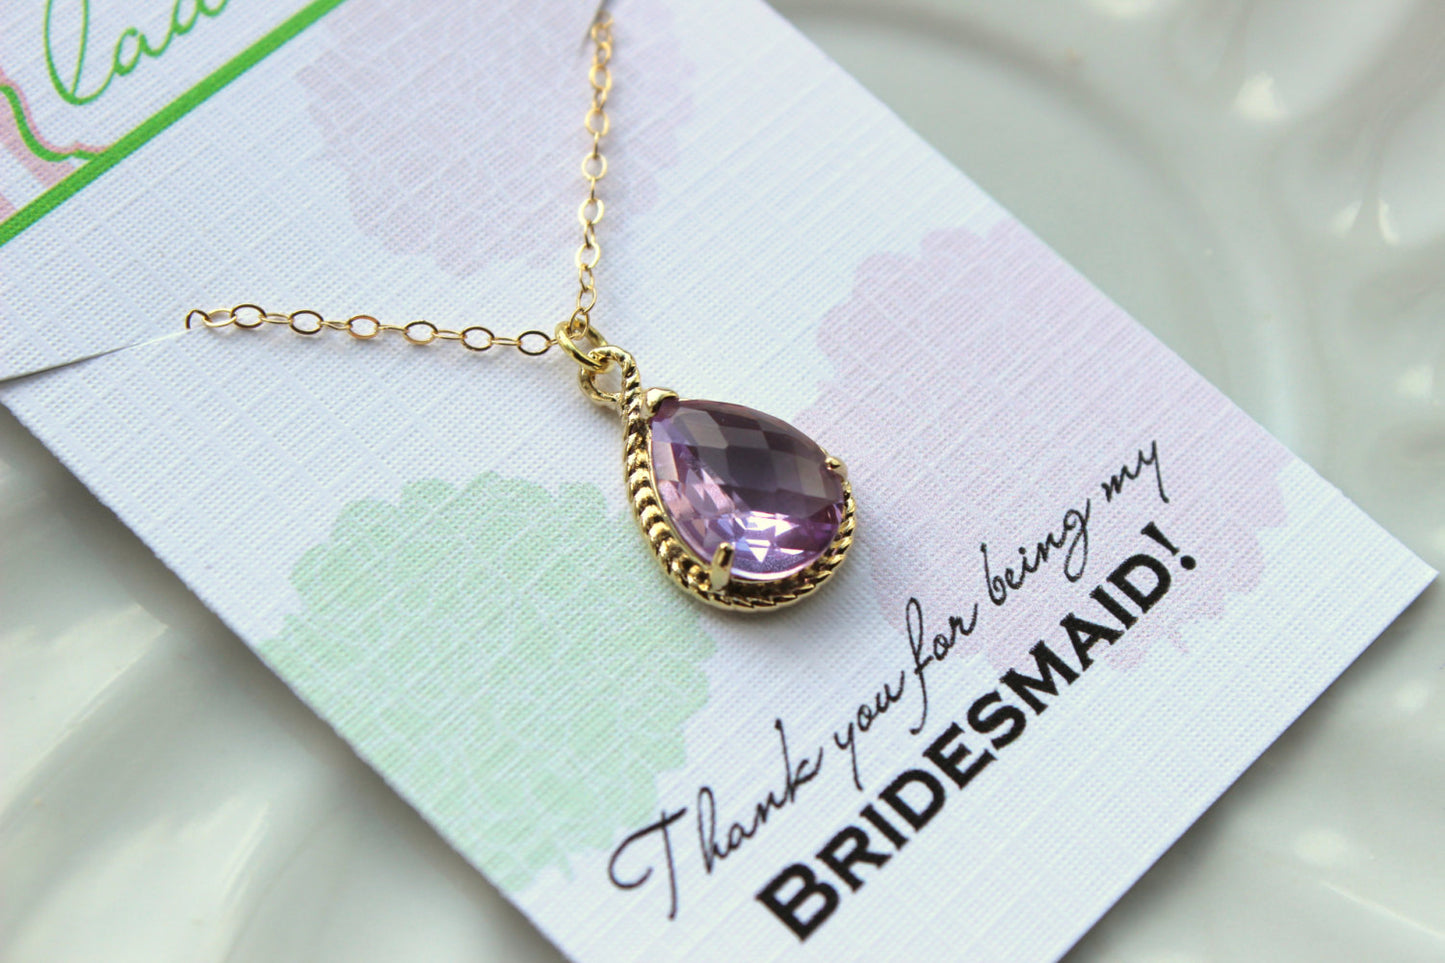 Gold Lavender Necklace Purple Lilac Wedding Necklace Jewelry Bridesmaid Gift Jewelry - Lavender Jewelry Gift Under 30